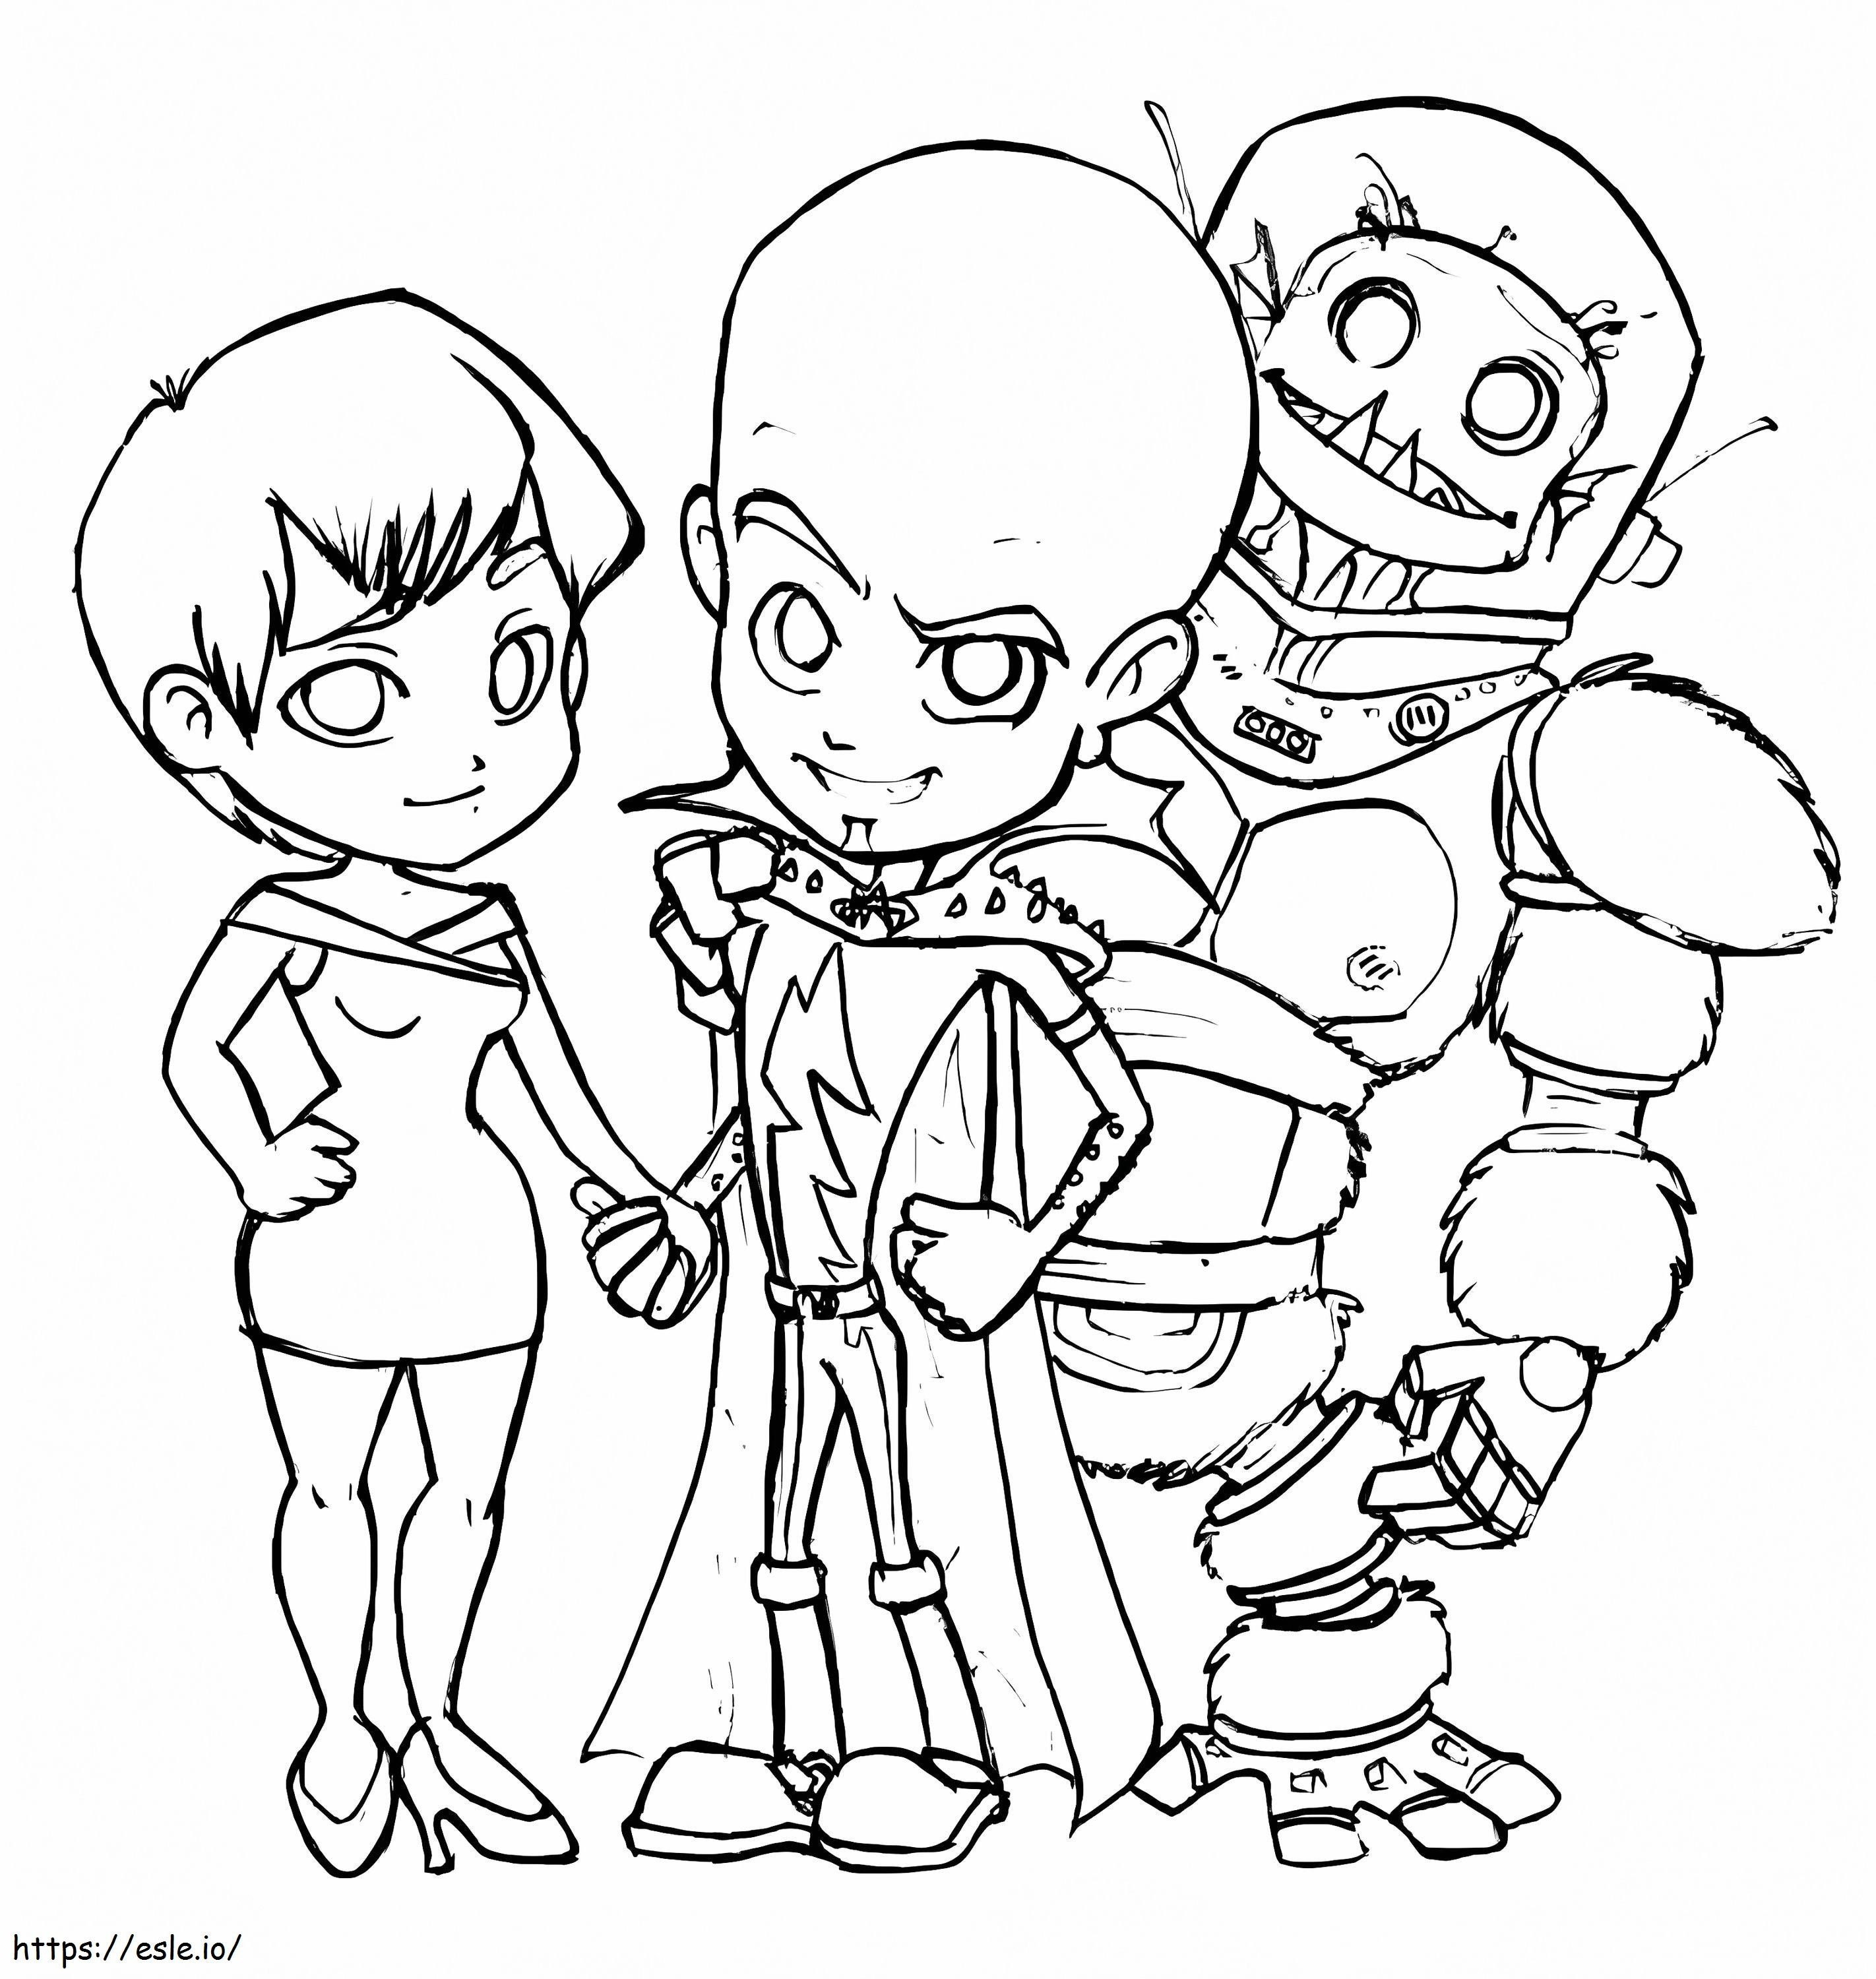 Megamind 4 coloring page